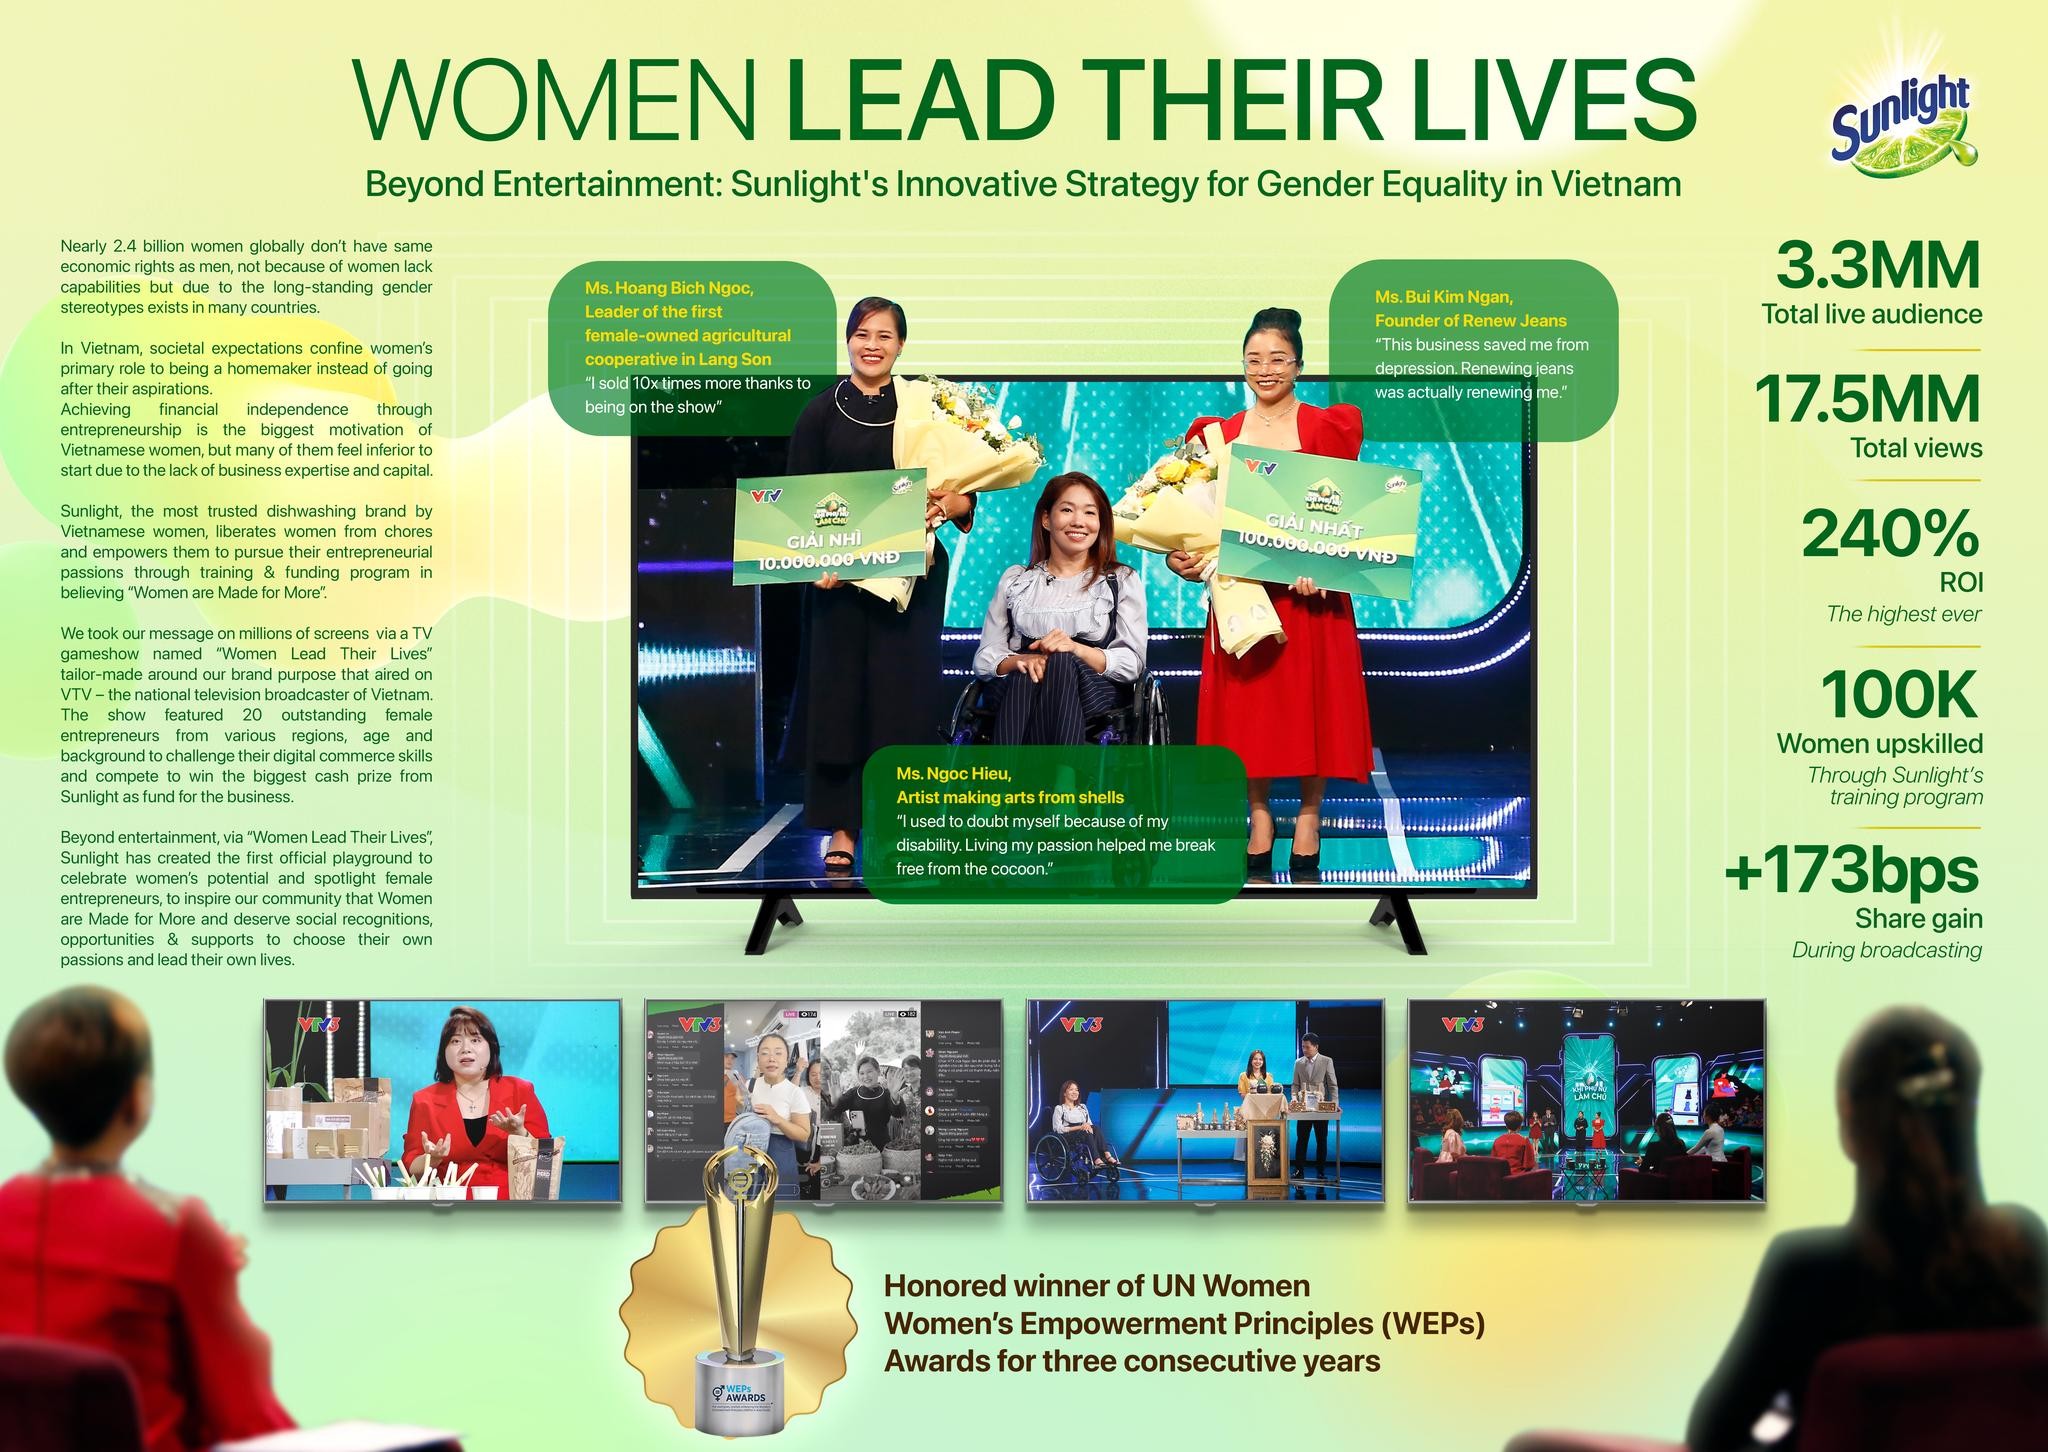 Women Lead Their Lives Beyond Entertainment: Sunlight’s Innovative Strategy for Gender Equality in Vietnam